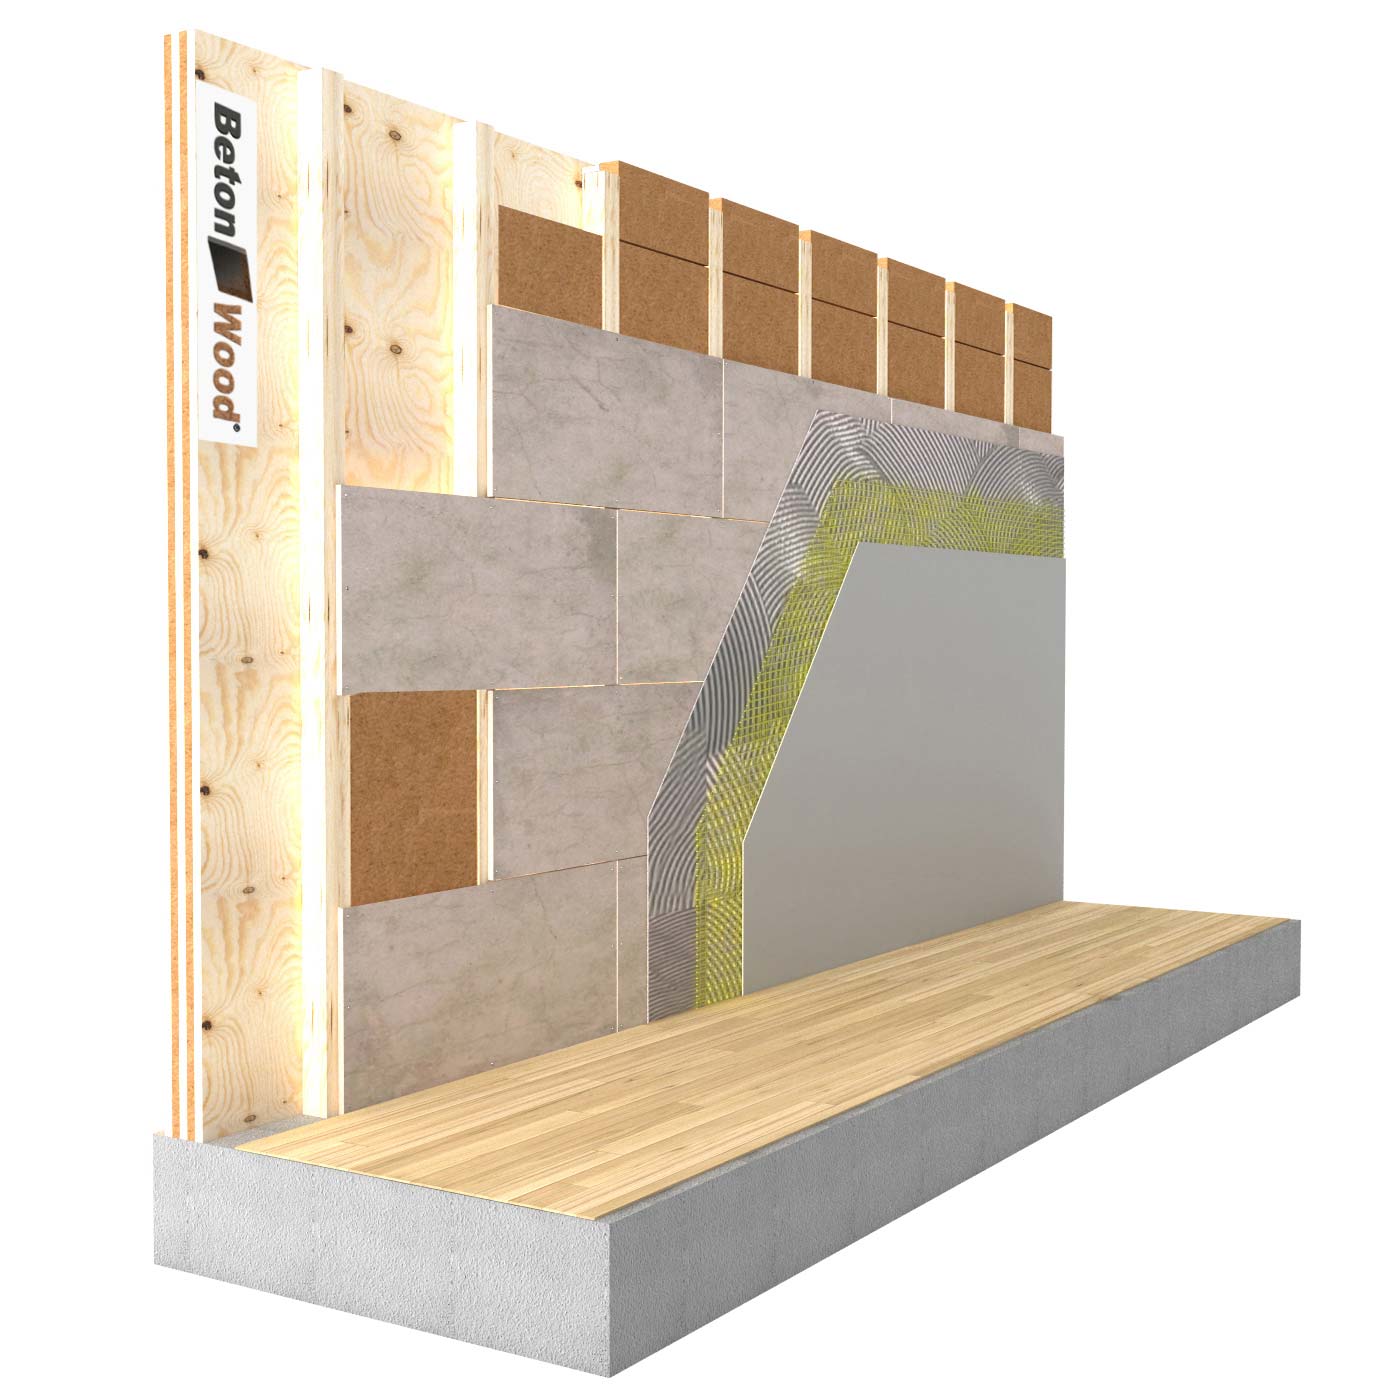 Internal insulation system in Protect dry Fiber wood shop and cement bonded particle board